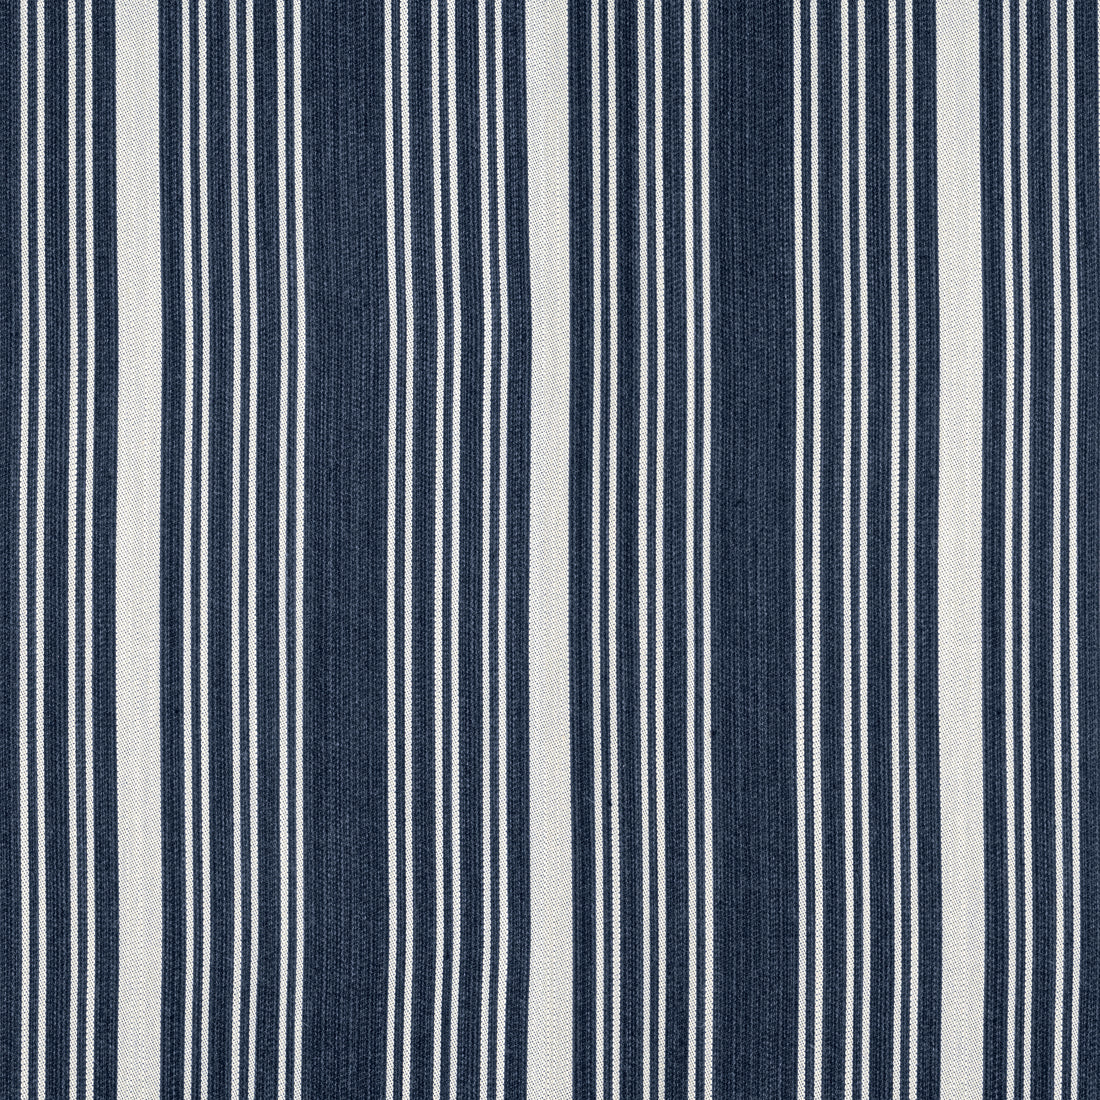 Kaia Stripe fabric in navy color - pattern number W8538 - by Thibaut in the Villa collection